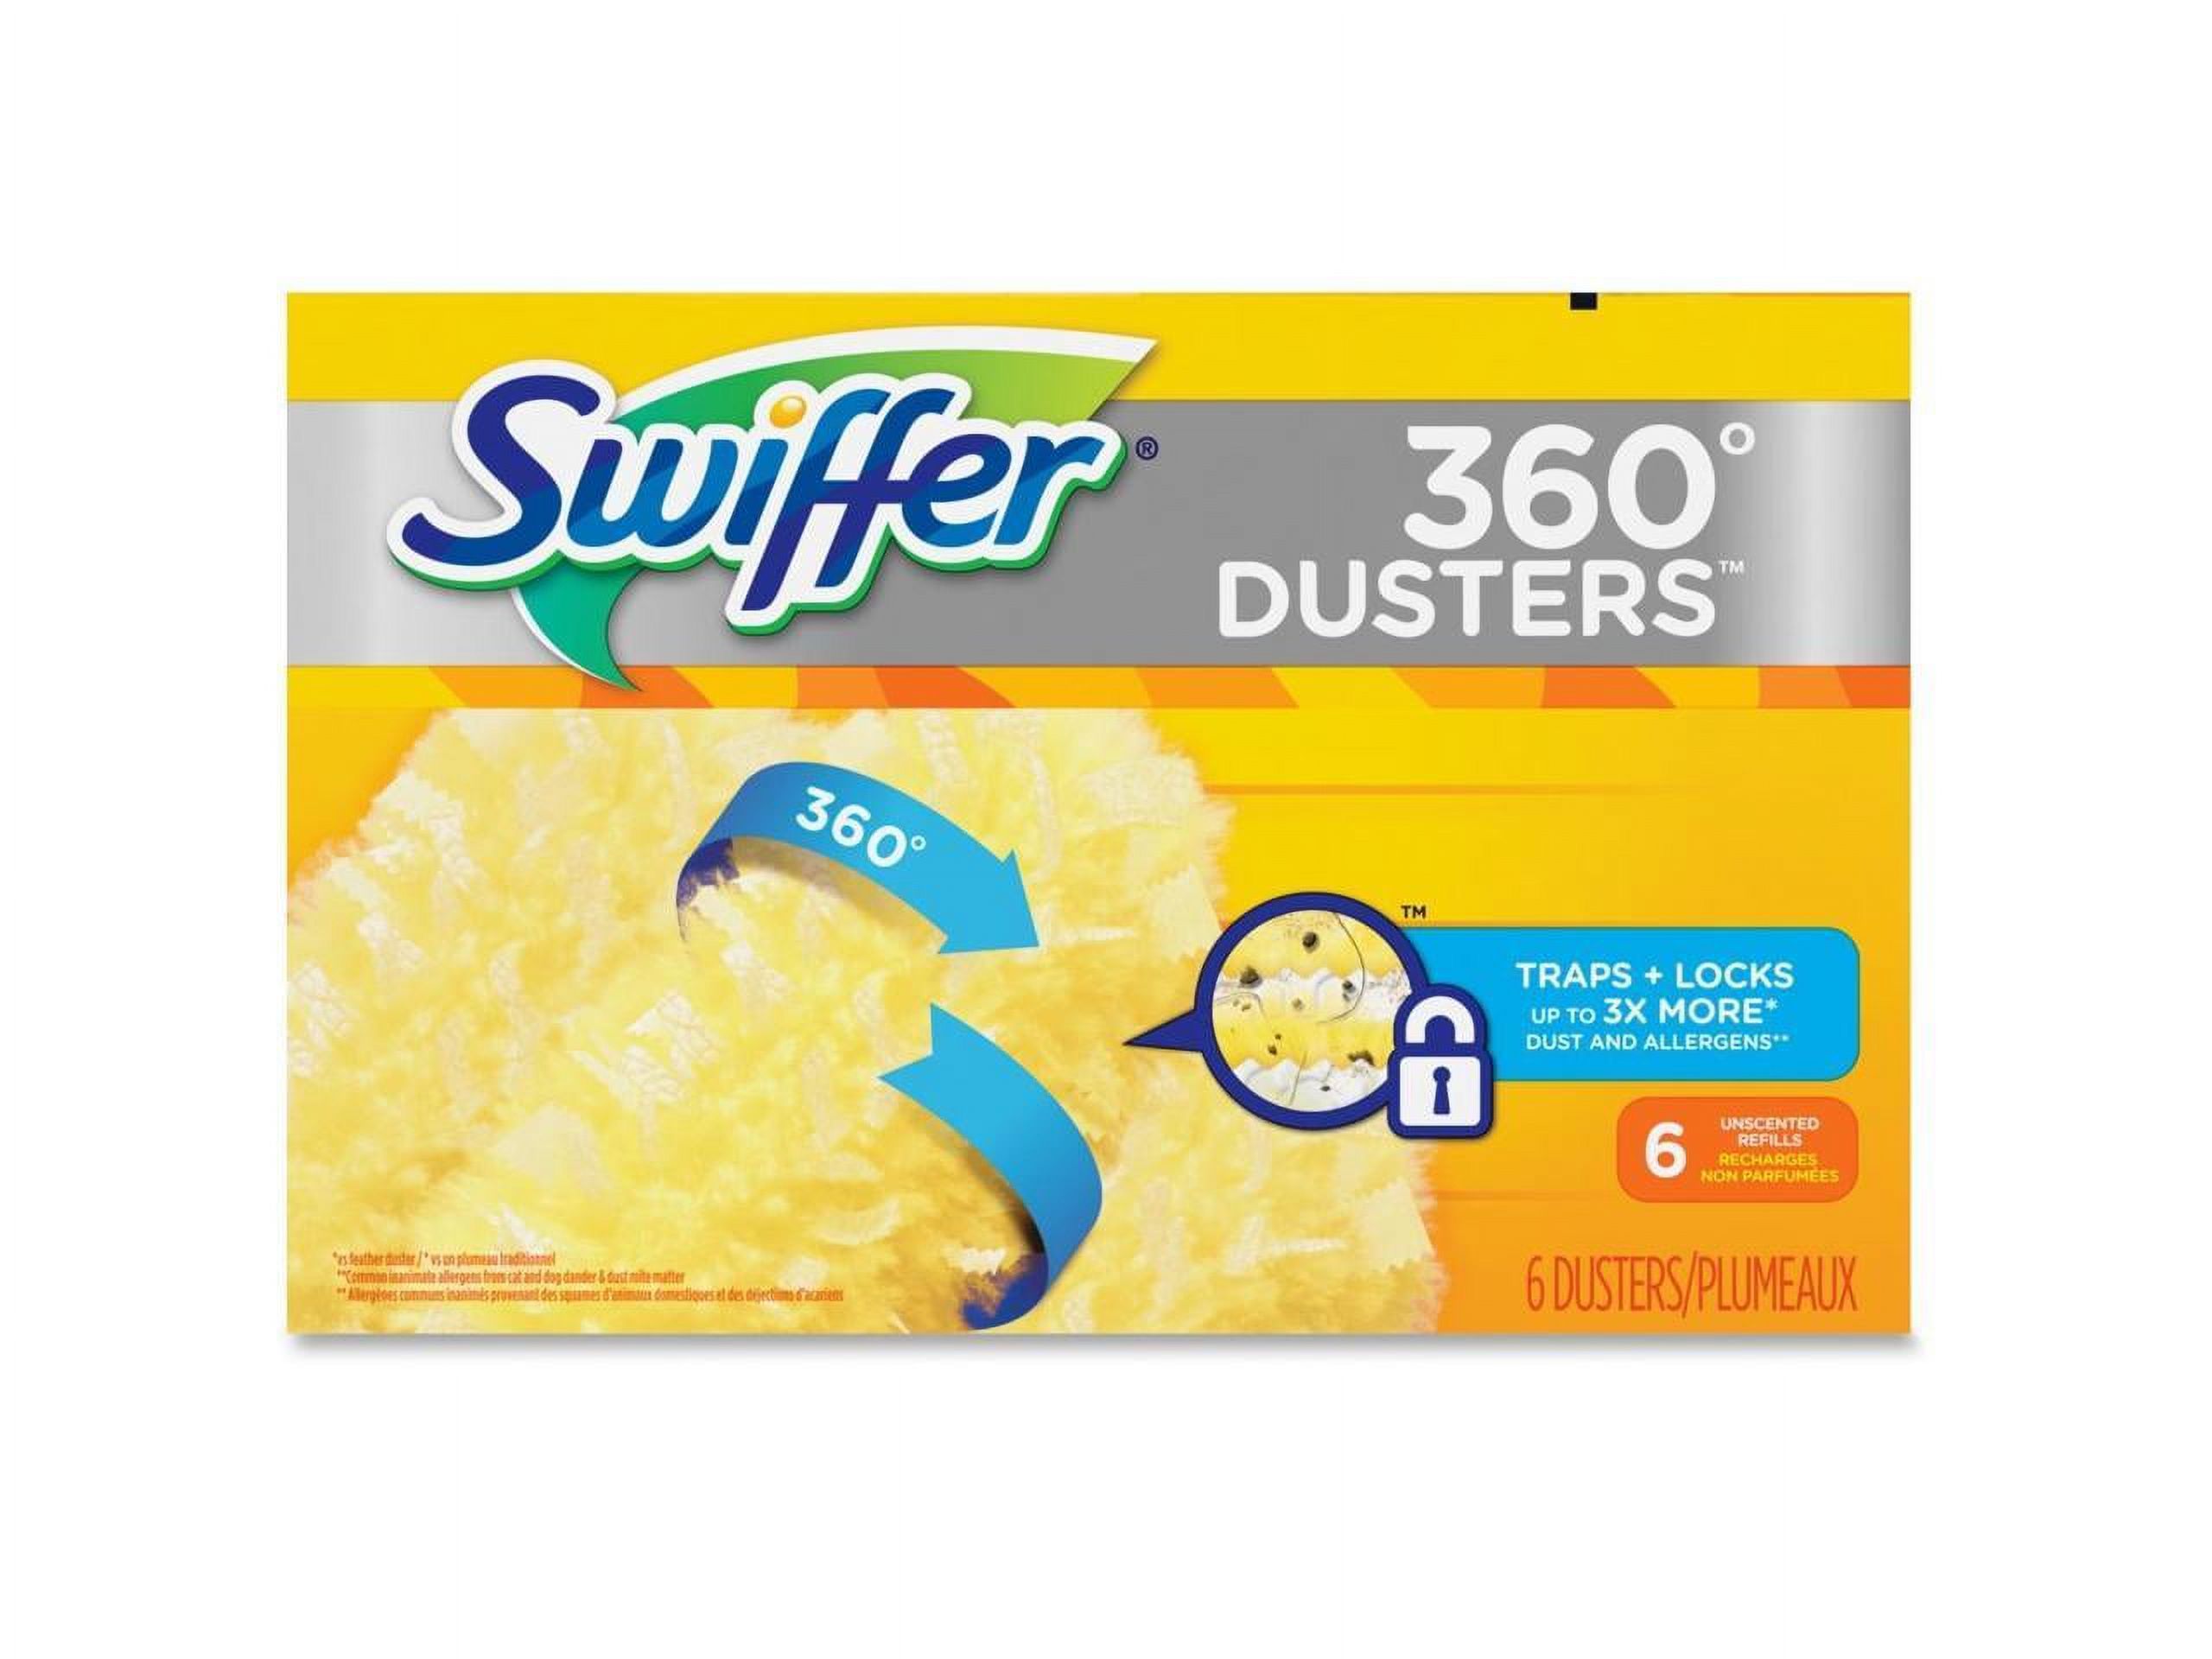 Swiffer Heavy Duty Duster, Refills, 6 Count, Yellow, Unscented - image 1 of 9